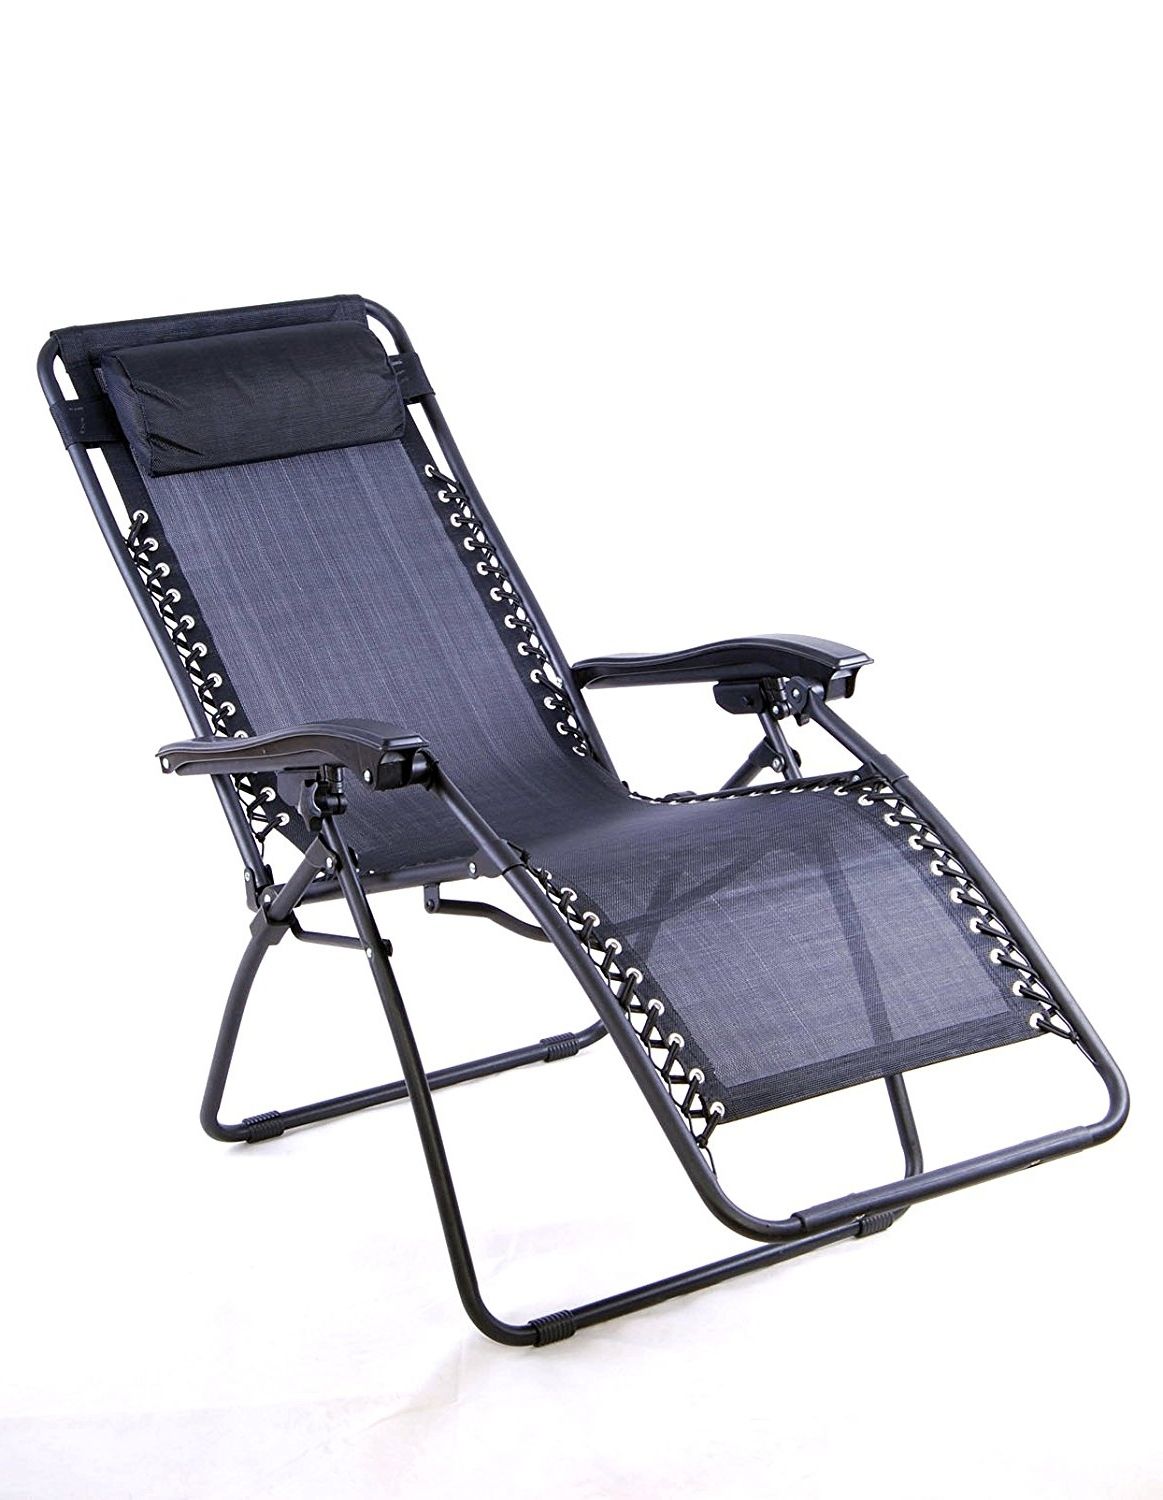 Most Popular Furniture: Sonoma Anti Gravity Chair For Elegant Lounge Chair Intended For Chaise Lounge Chairs At Kohls (View 4 of 15)